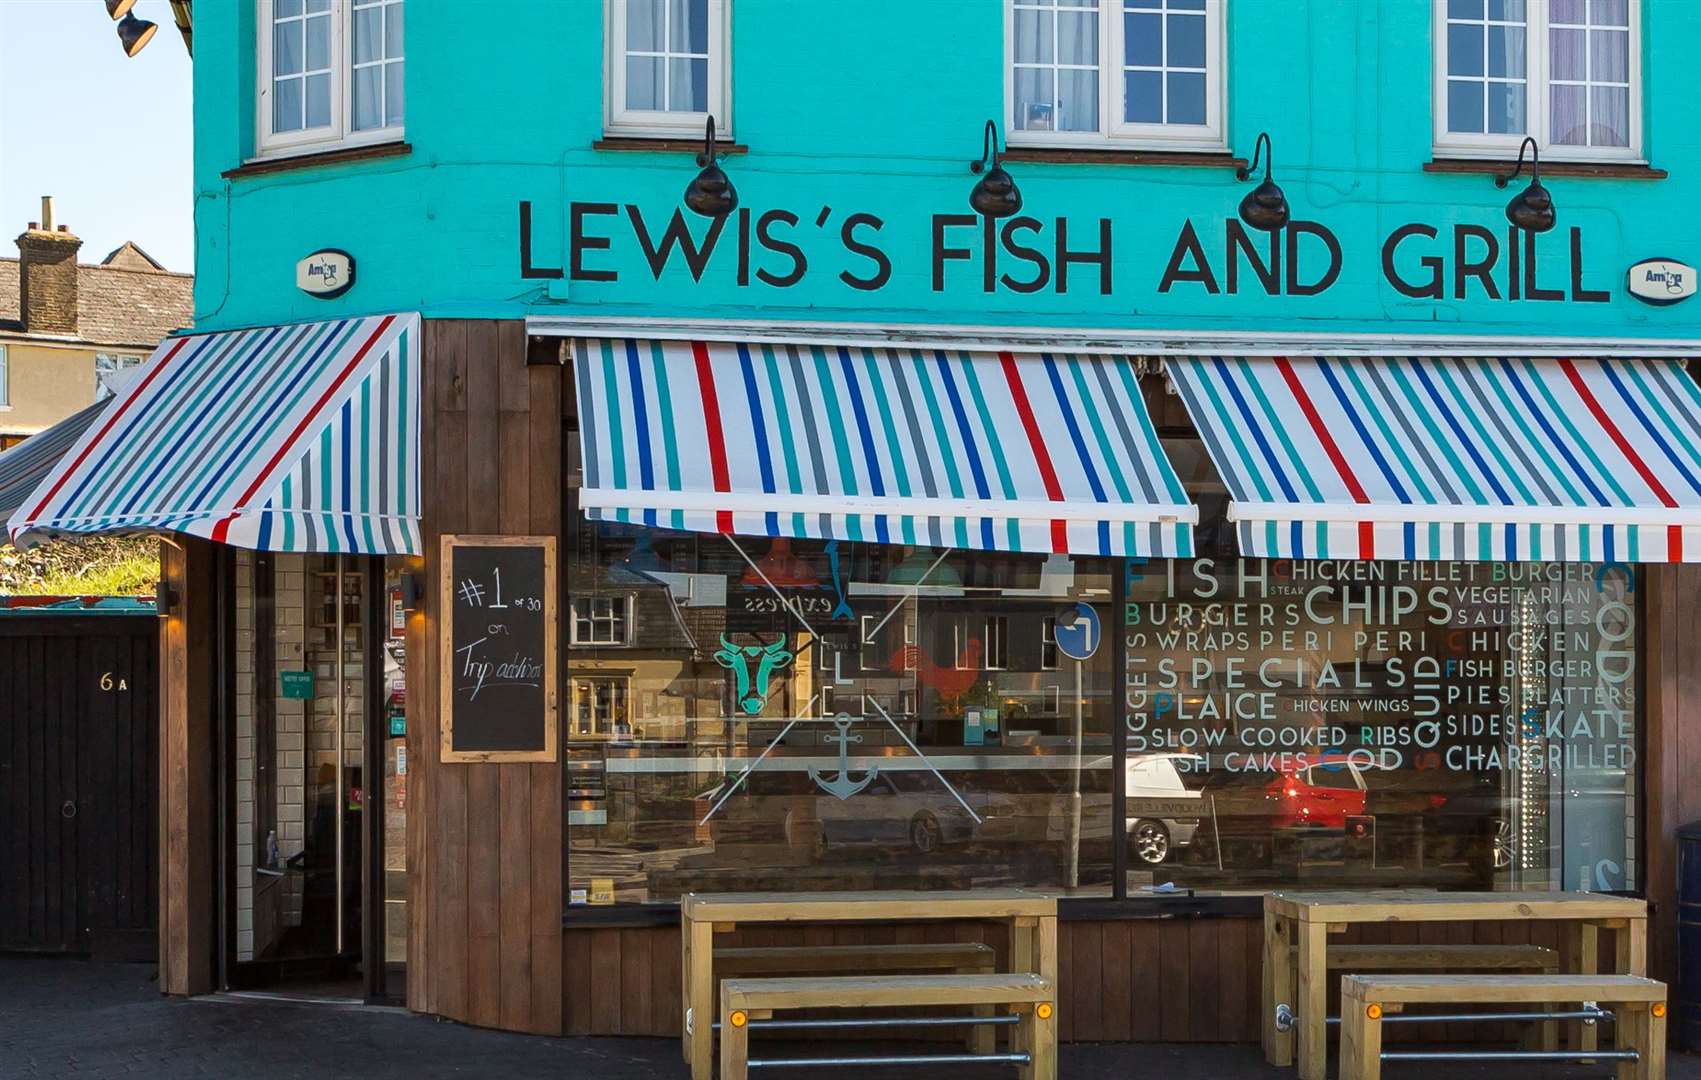 Lewis's Fish & Grill in Loose Road, Maidstone